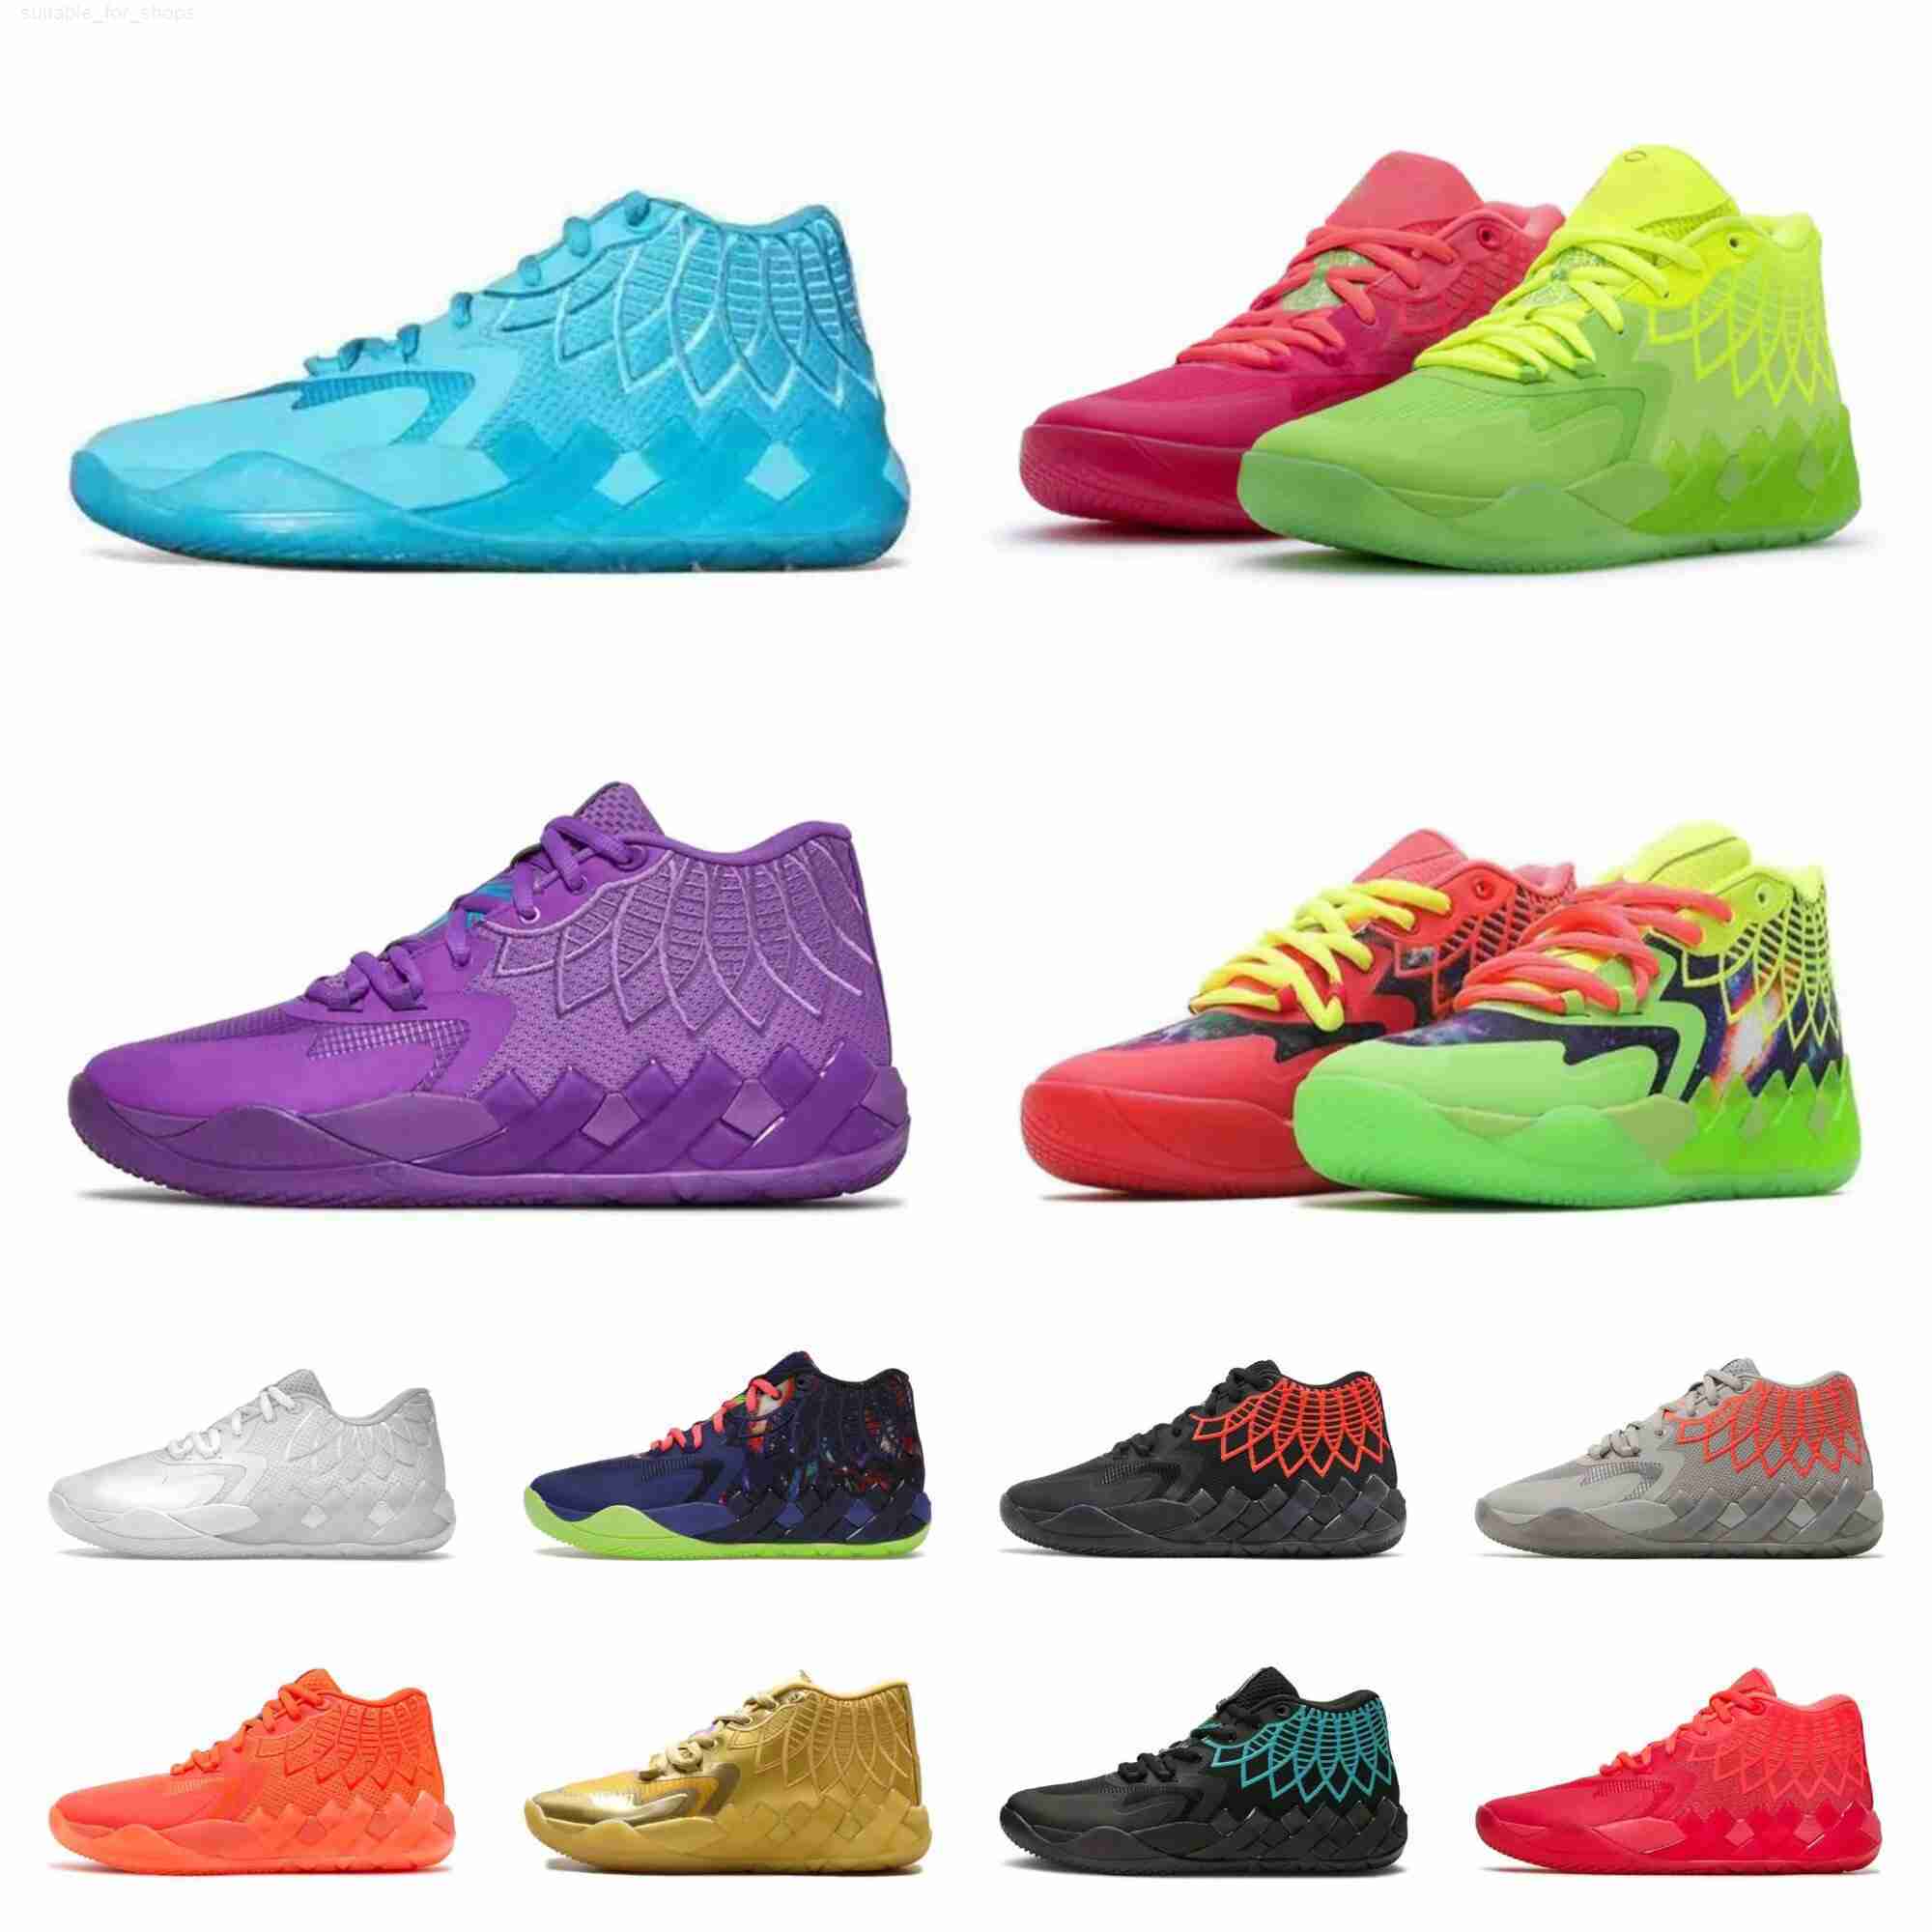 

Top LaMelo Ball 1 MB.01 Men Basketball Shoes Sneaker Black Blast Buzz City LO UFO Not From Here Queen City Rick and Morty Rock Ridge Red Mens Trainers Sports Sneakers 39-46, Y006